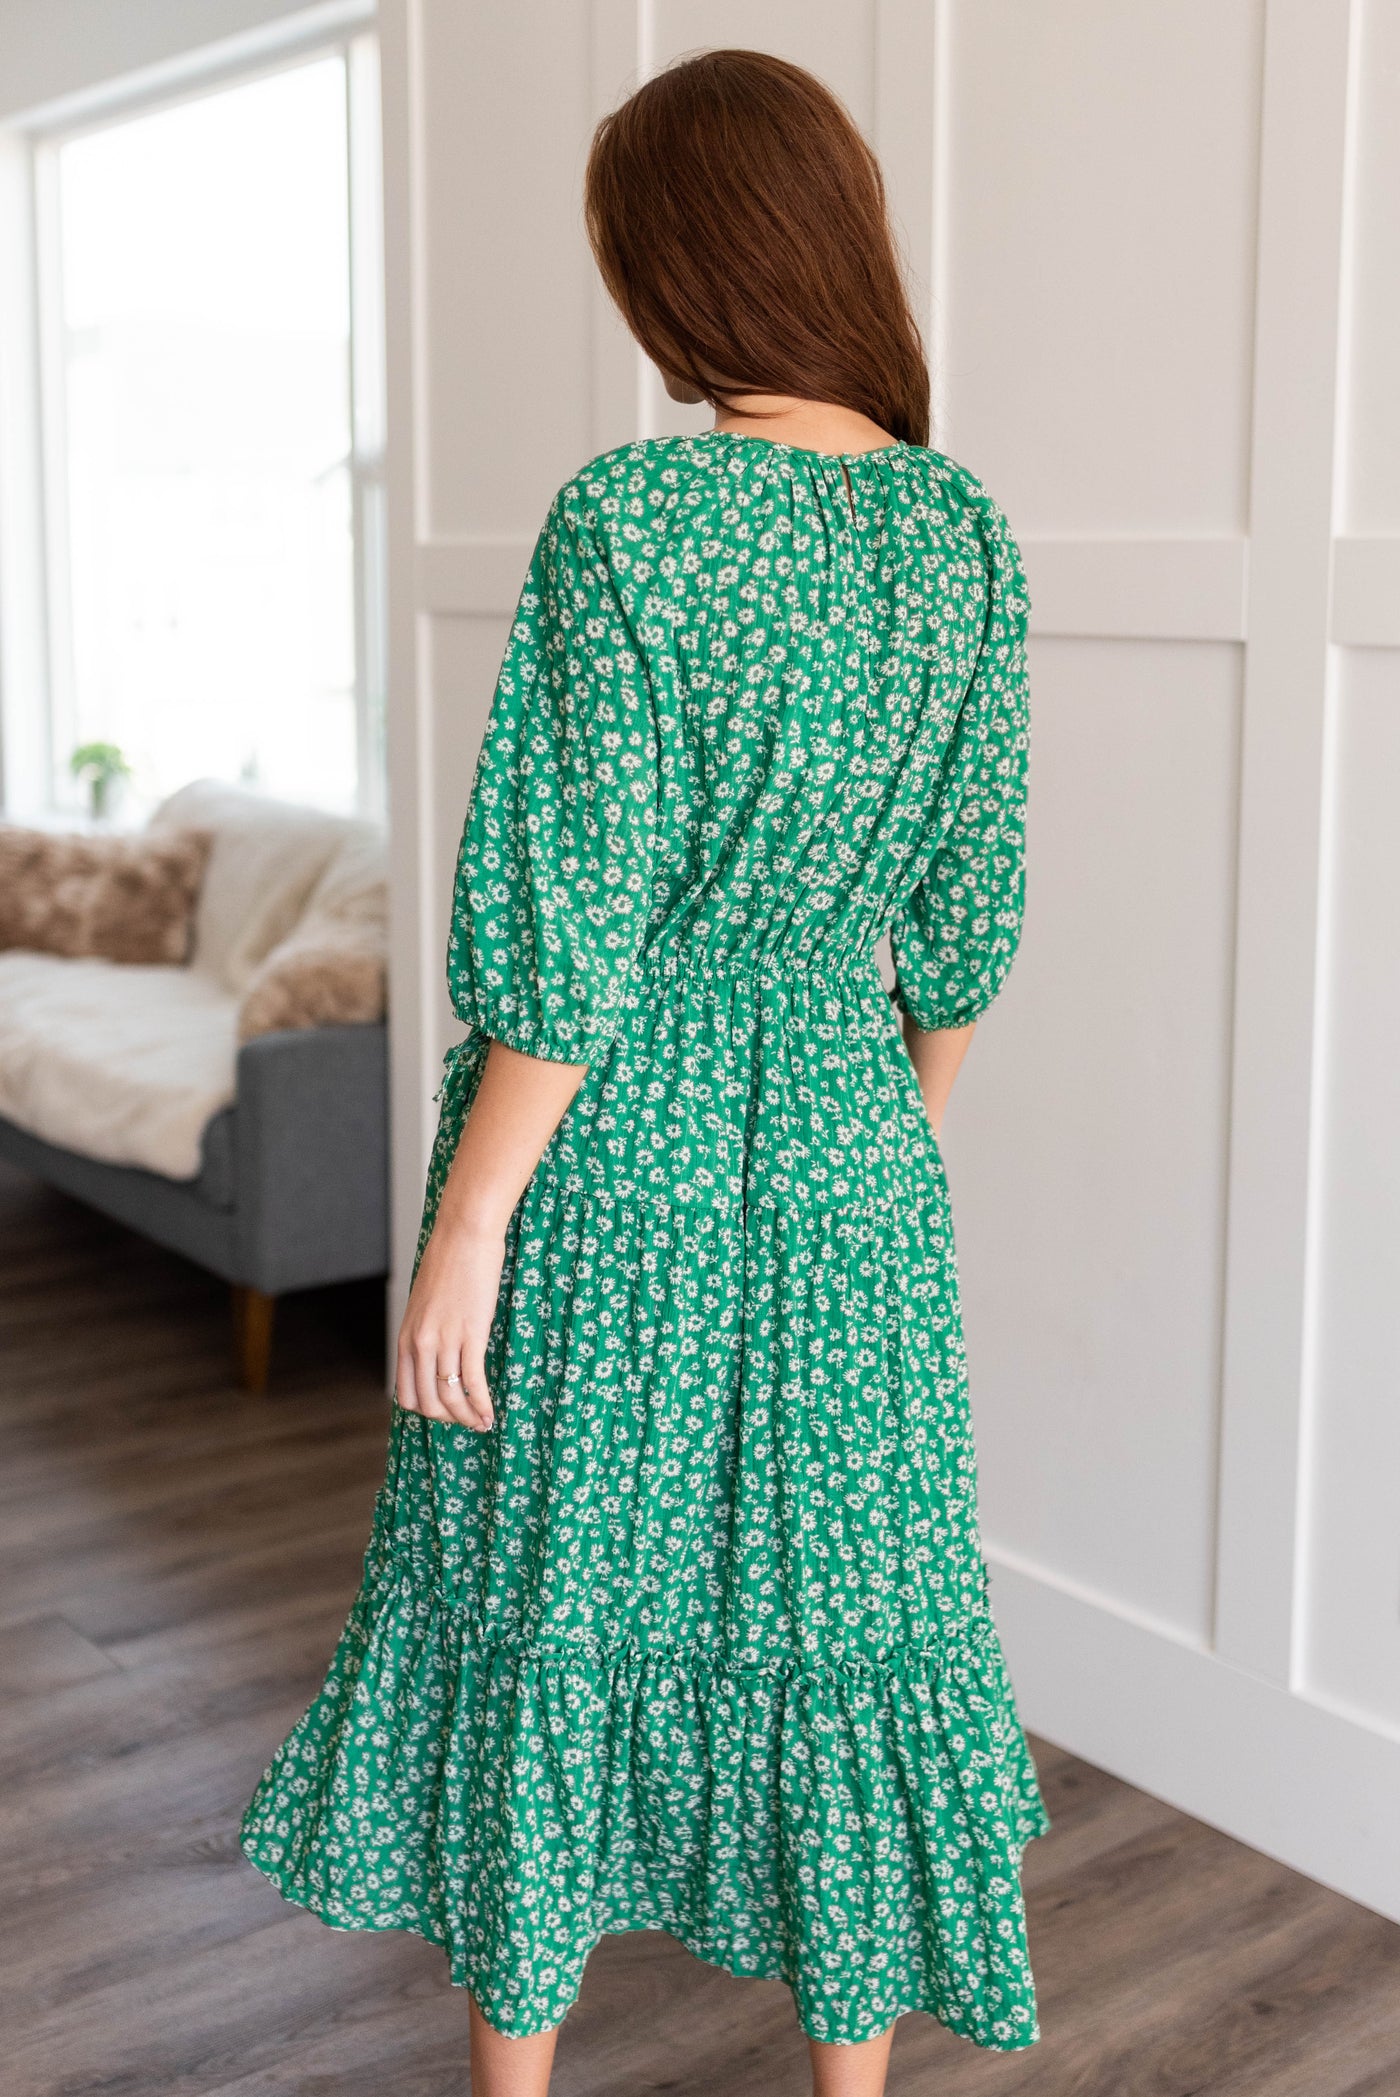 Back view of a green tiered dress